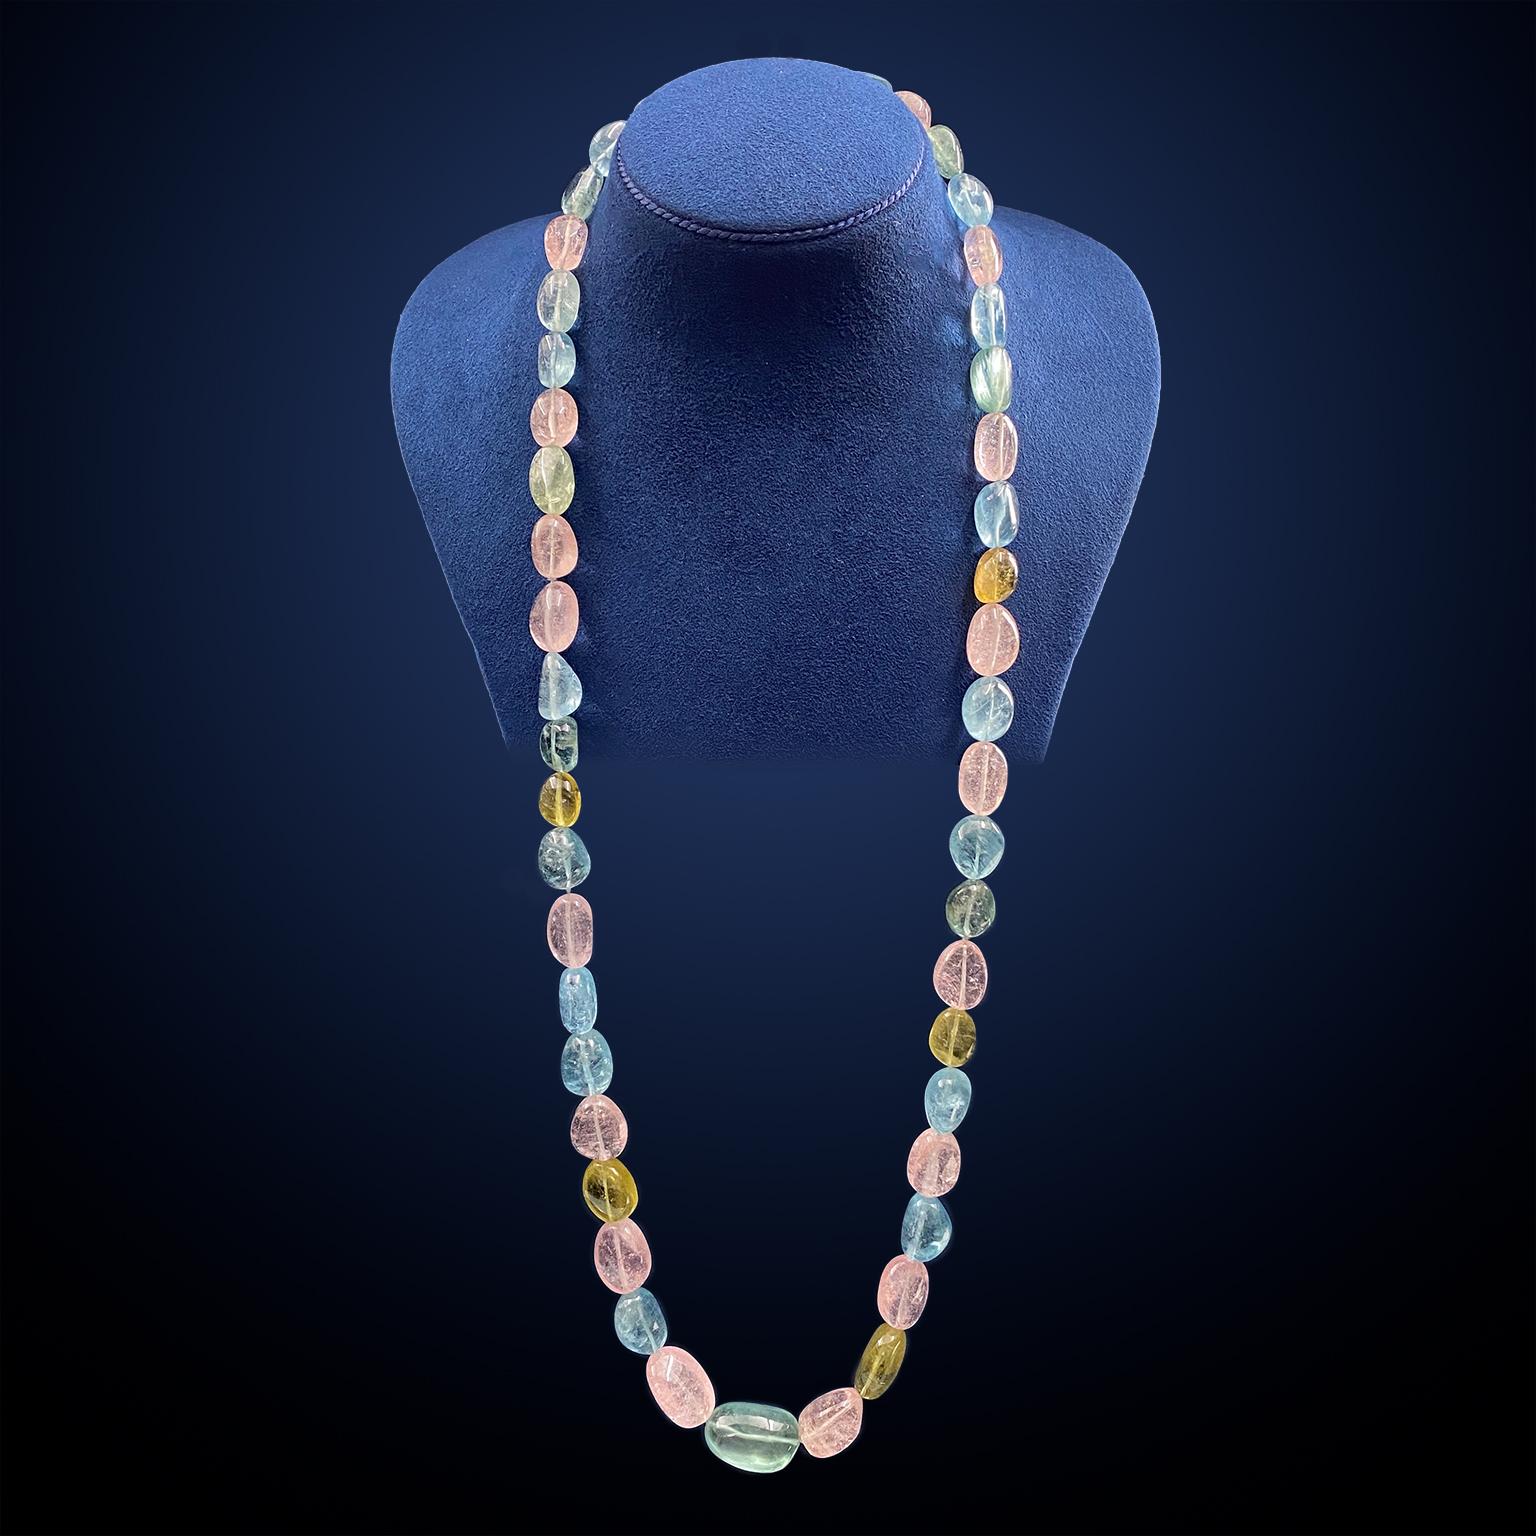 A pastel fusion of kunzite, aquamarine and yellow beryl make up this necklace. 50 beads of these gemstones are cut in varying shapes for a unique statement. An 18k yellow gold knot and toggle clasp secures this 37 inch long necklace.